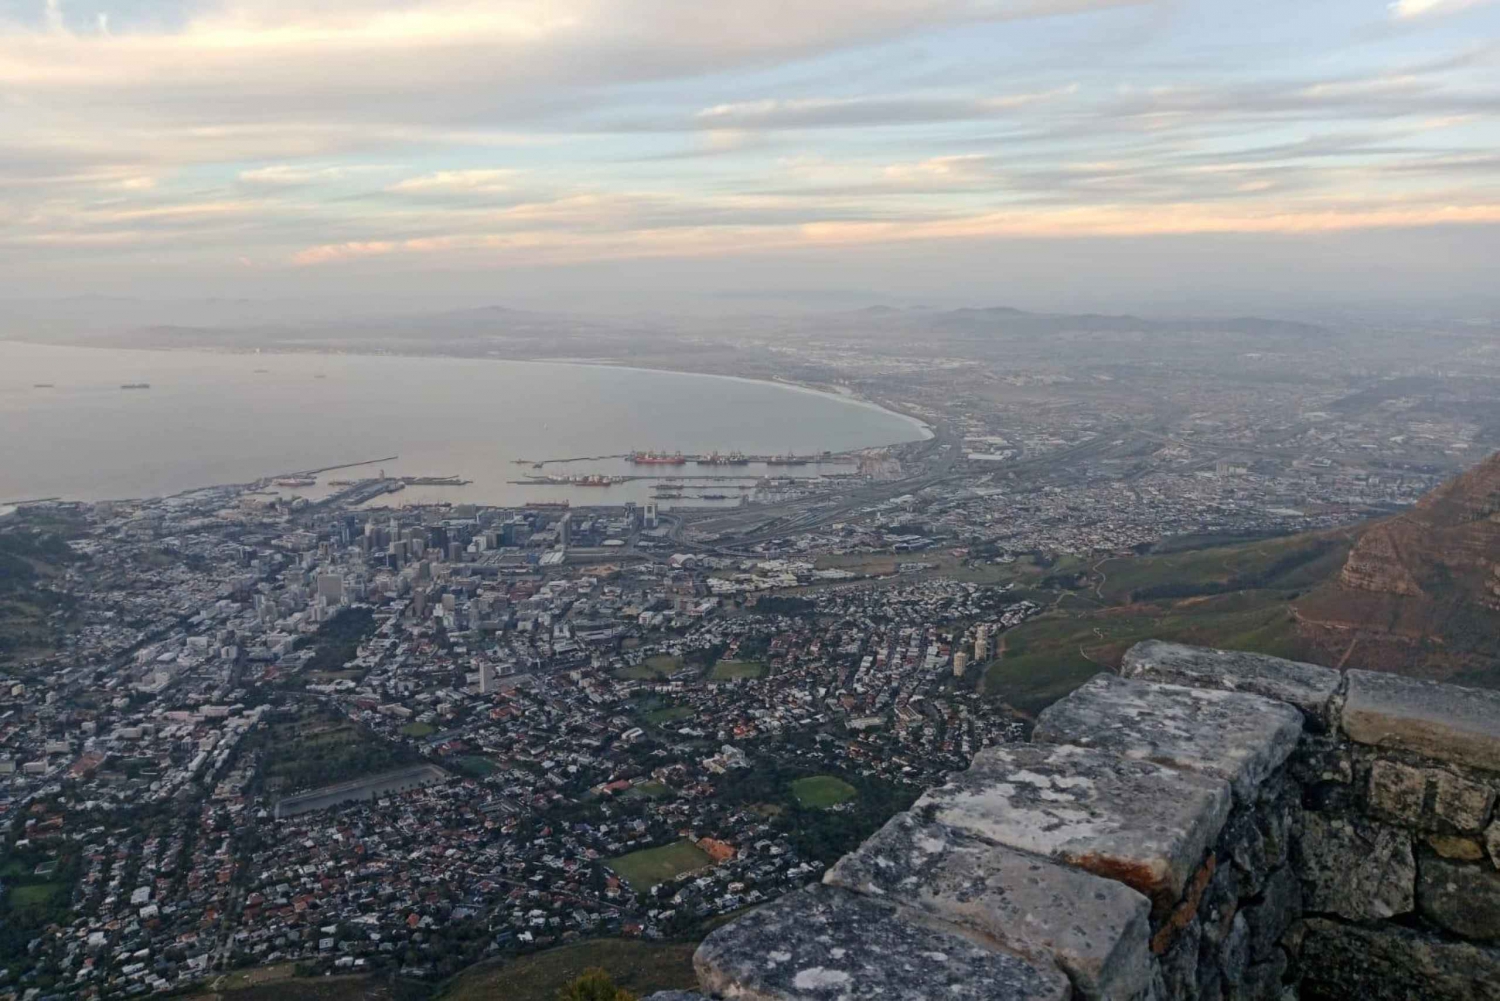 A full-day tour of Cape Town's cultural attractions City